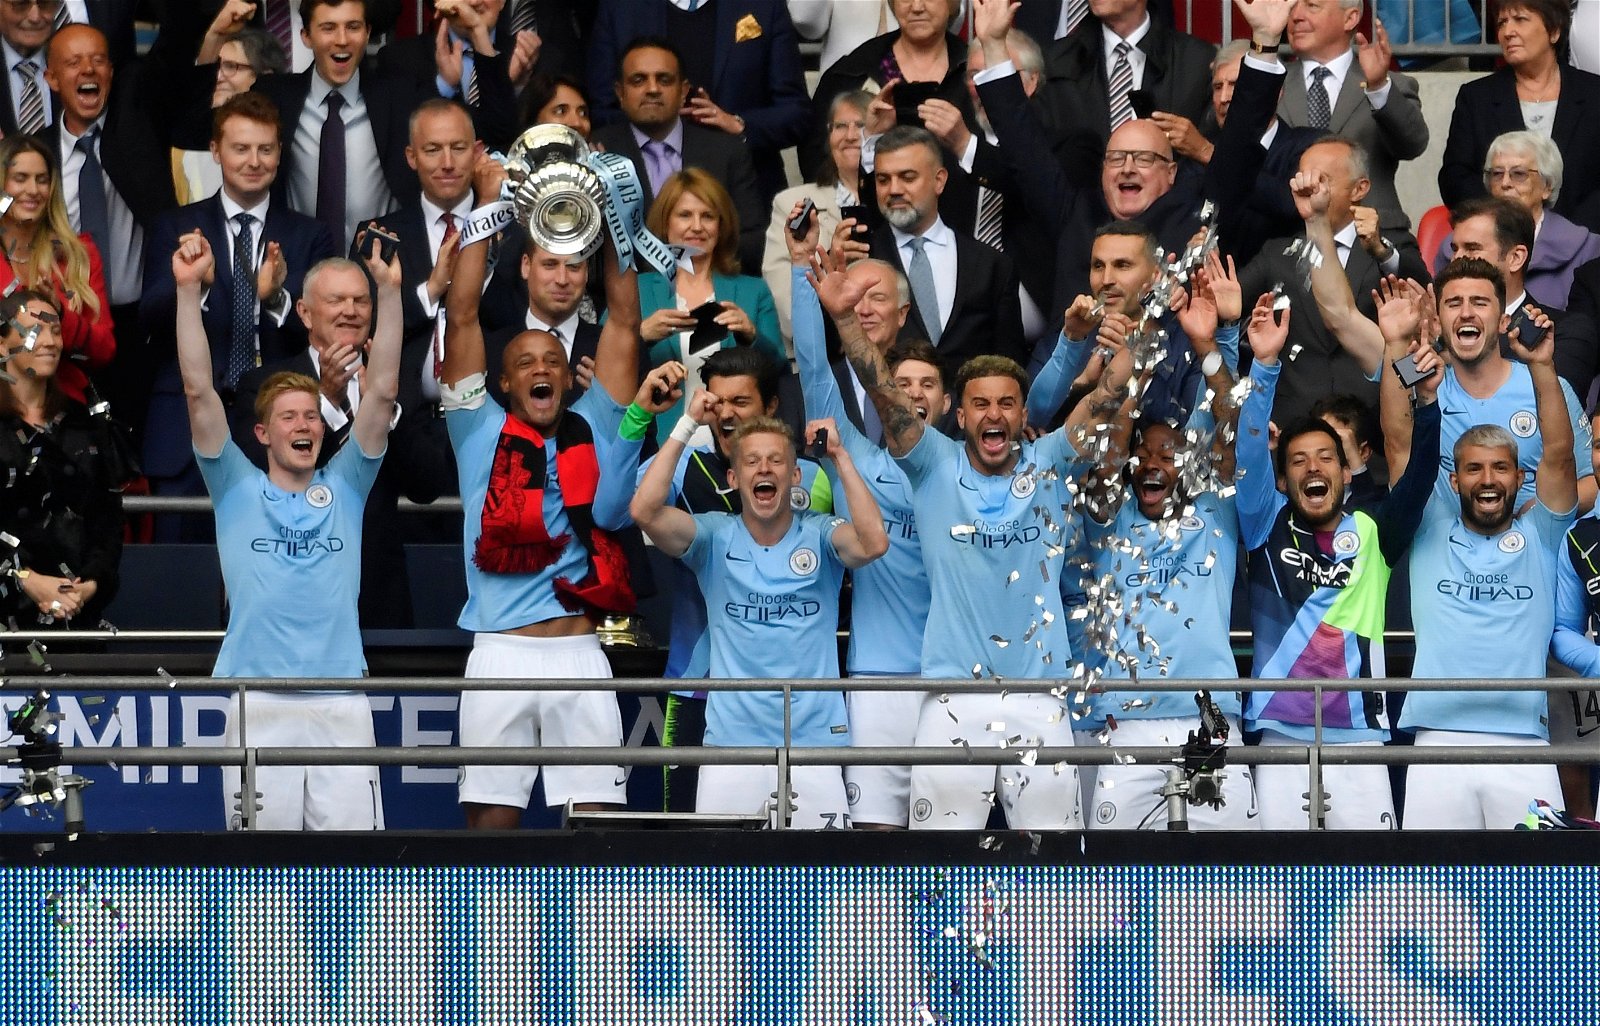 FA Cup winners 2019 - Manchester City is the 2019 FA Cup Winner